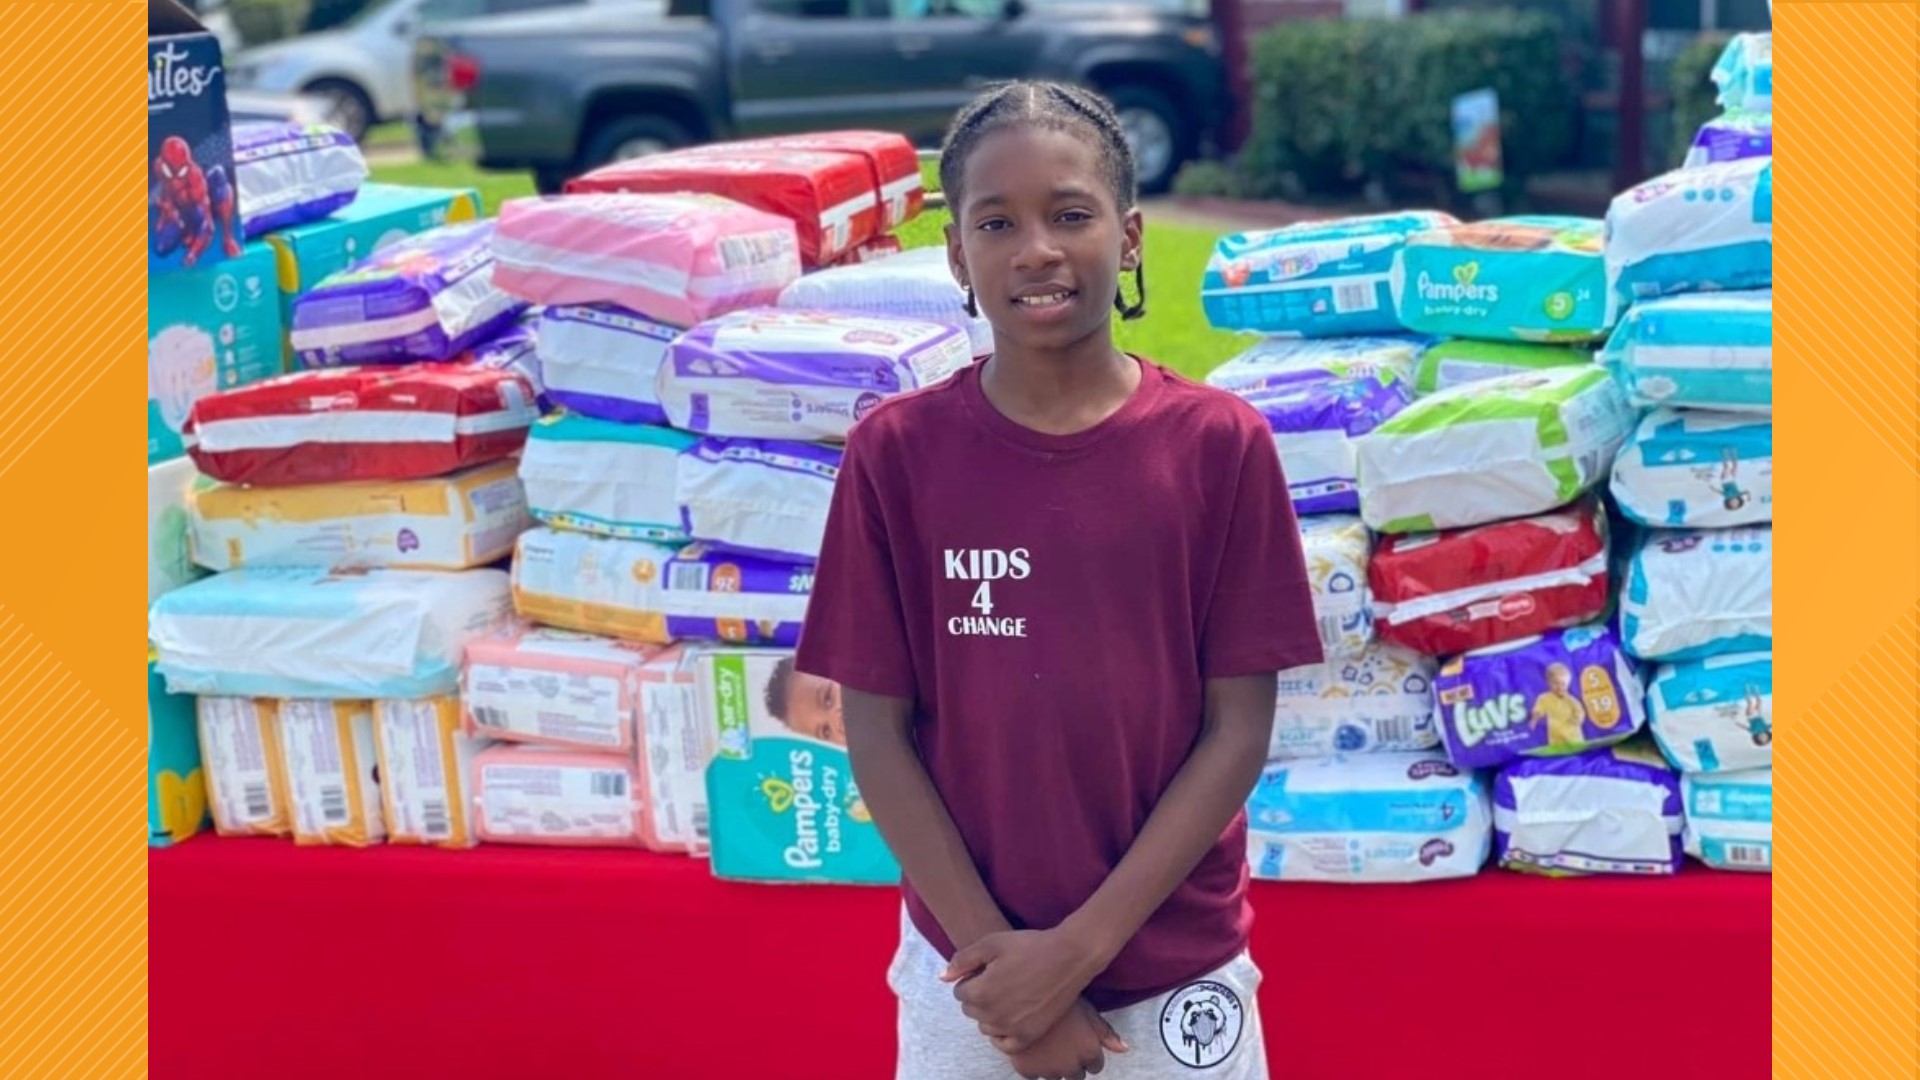 Diaper Drive! Eleven-year-old Cartier Carey started a lemonade stand and raised big bucks for moms in need during the pandemic and beyond.